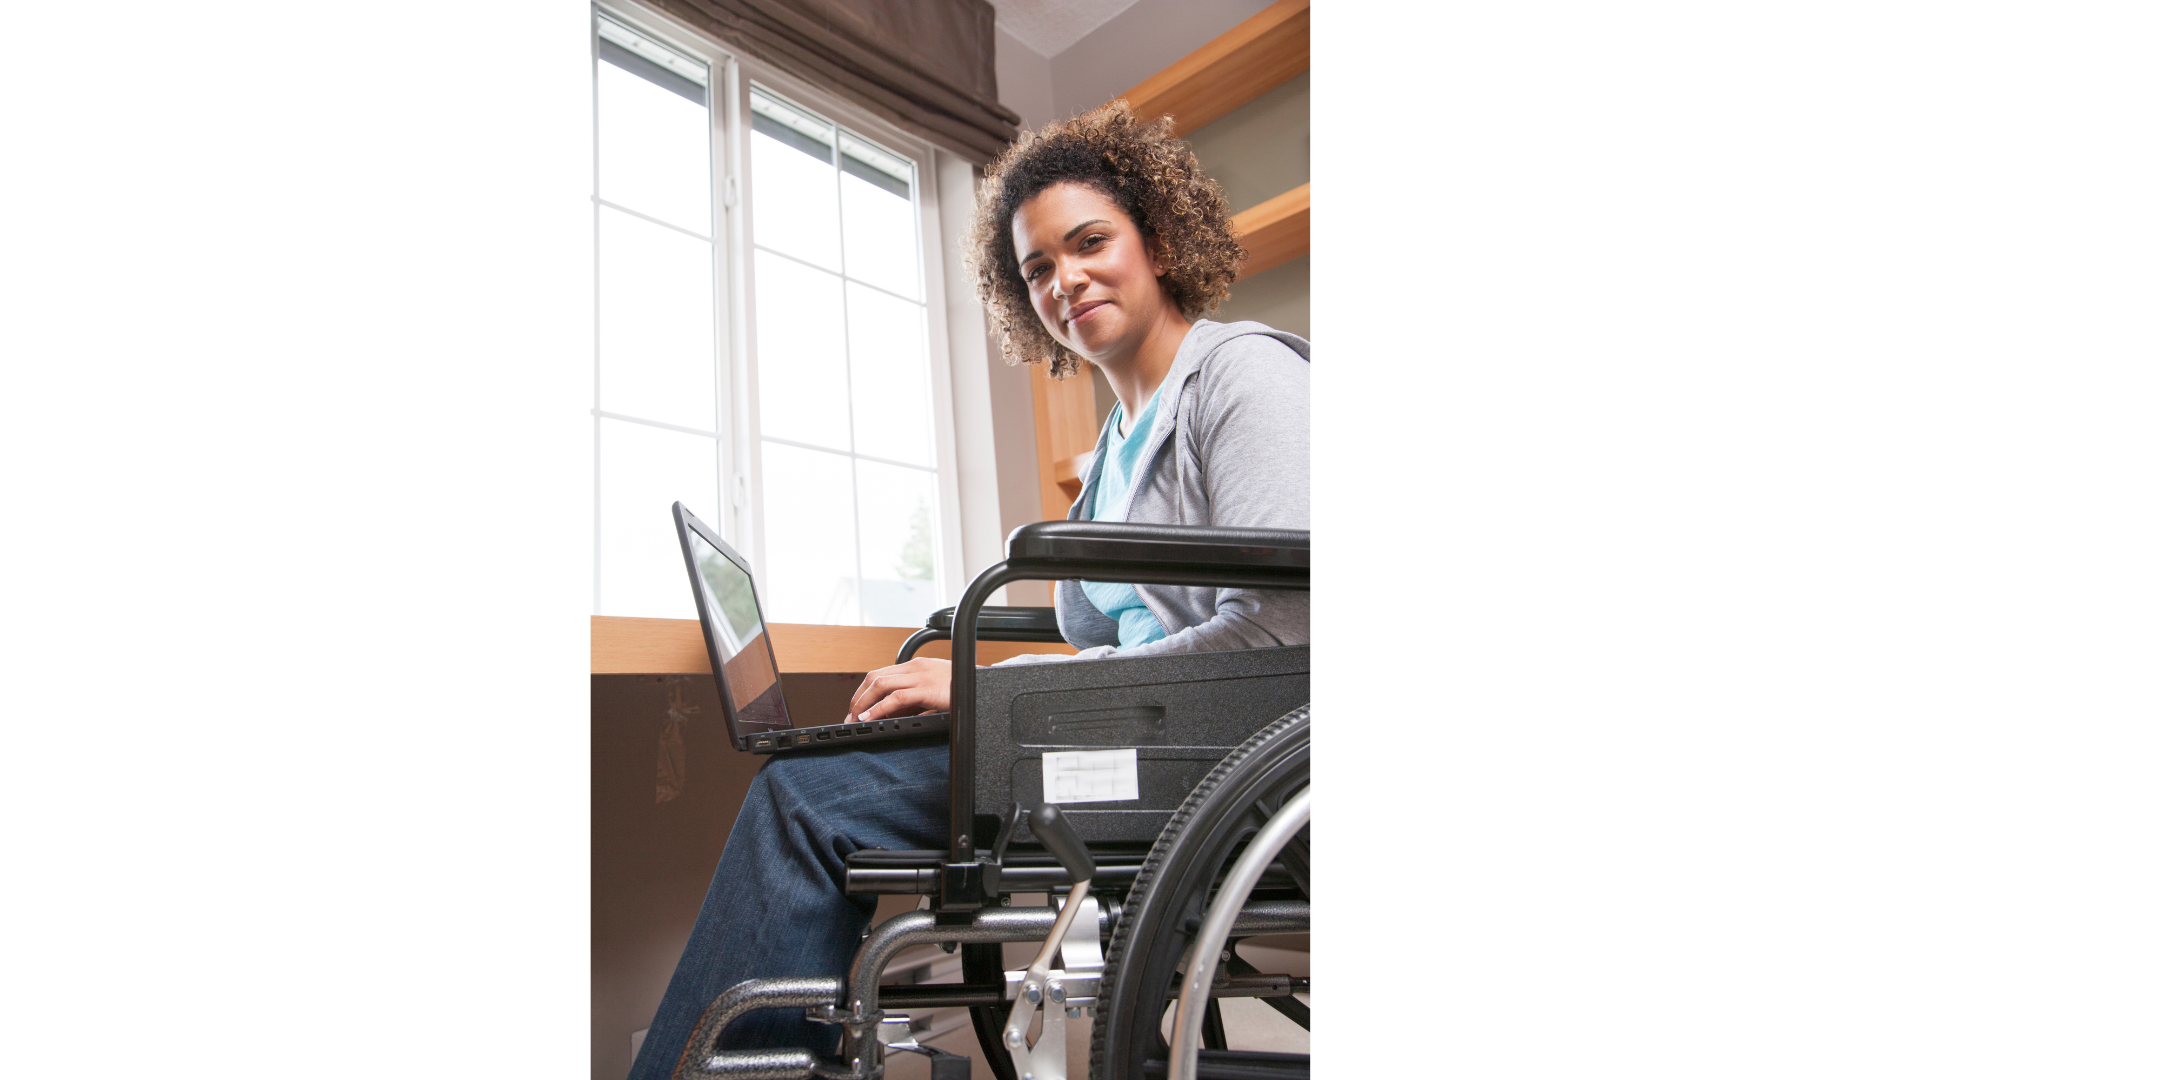 young woman with brown curly hair in wheelchair using laptop. wearing jeans and a grey sweatshirt jacket.